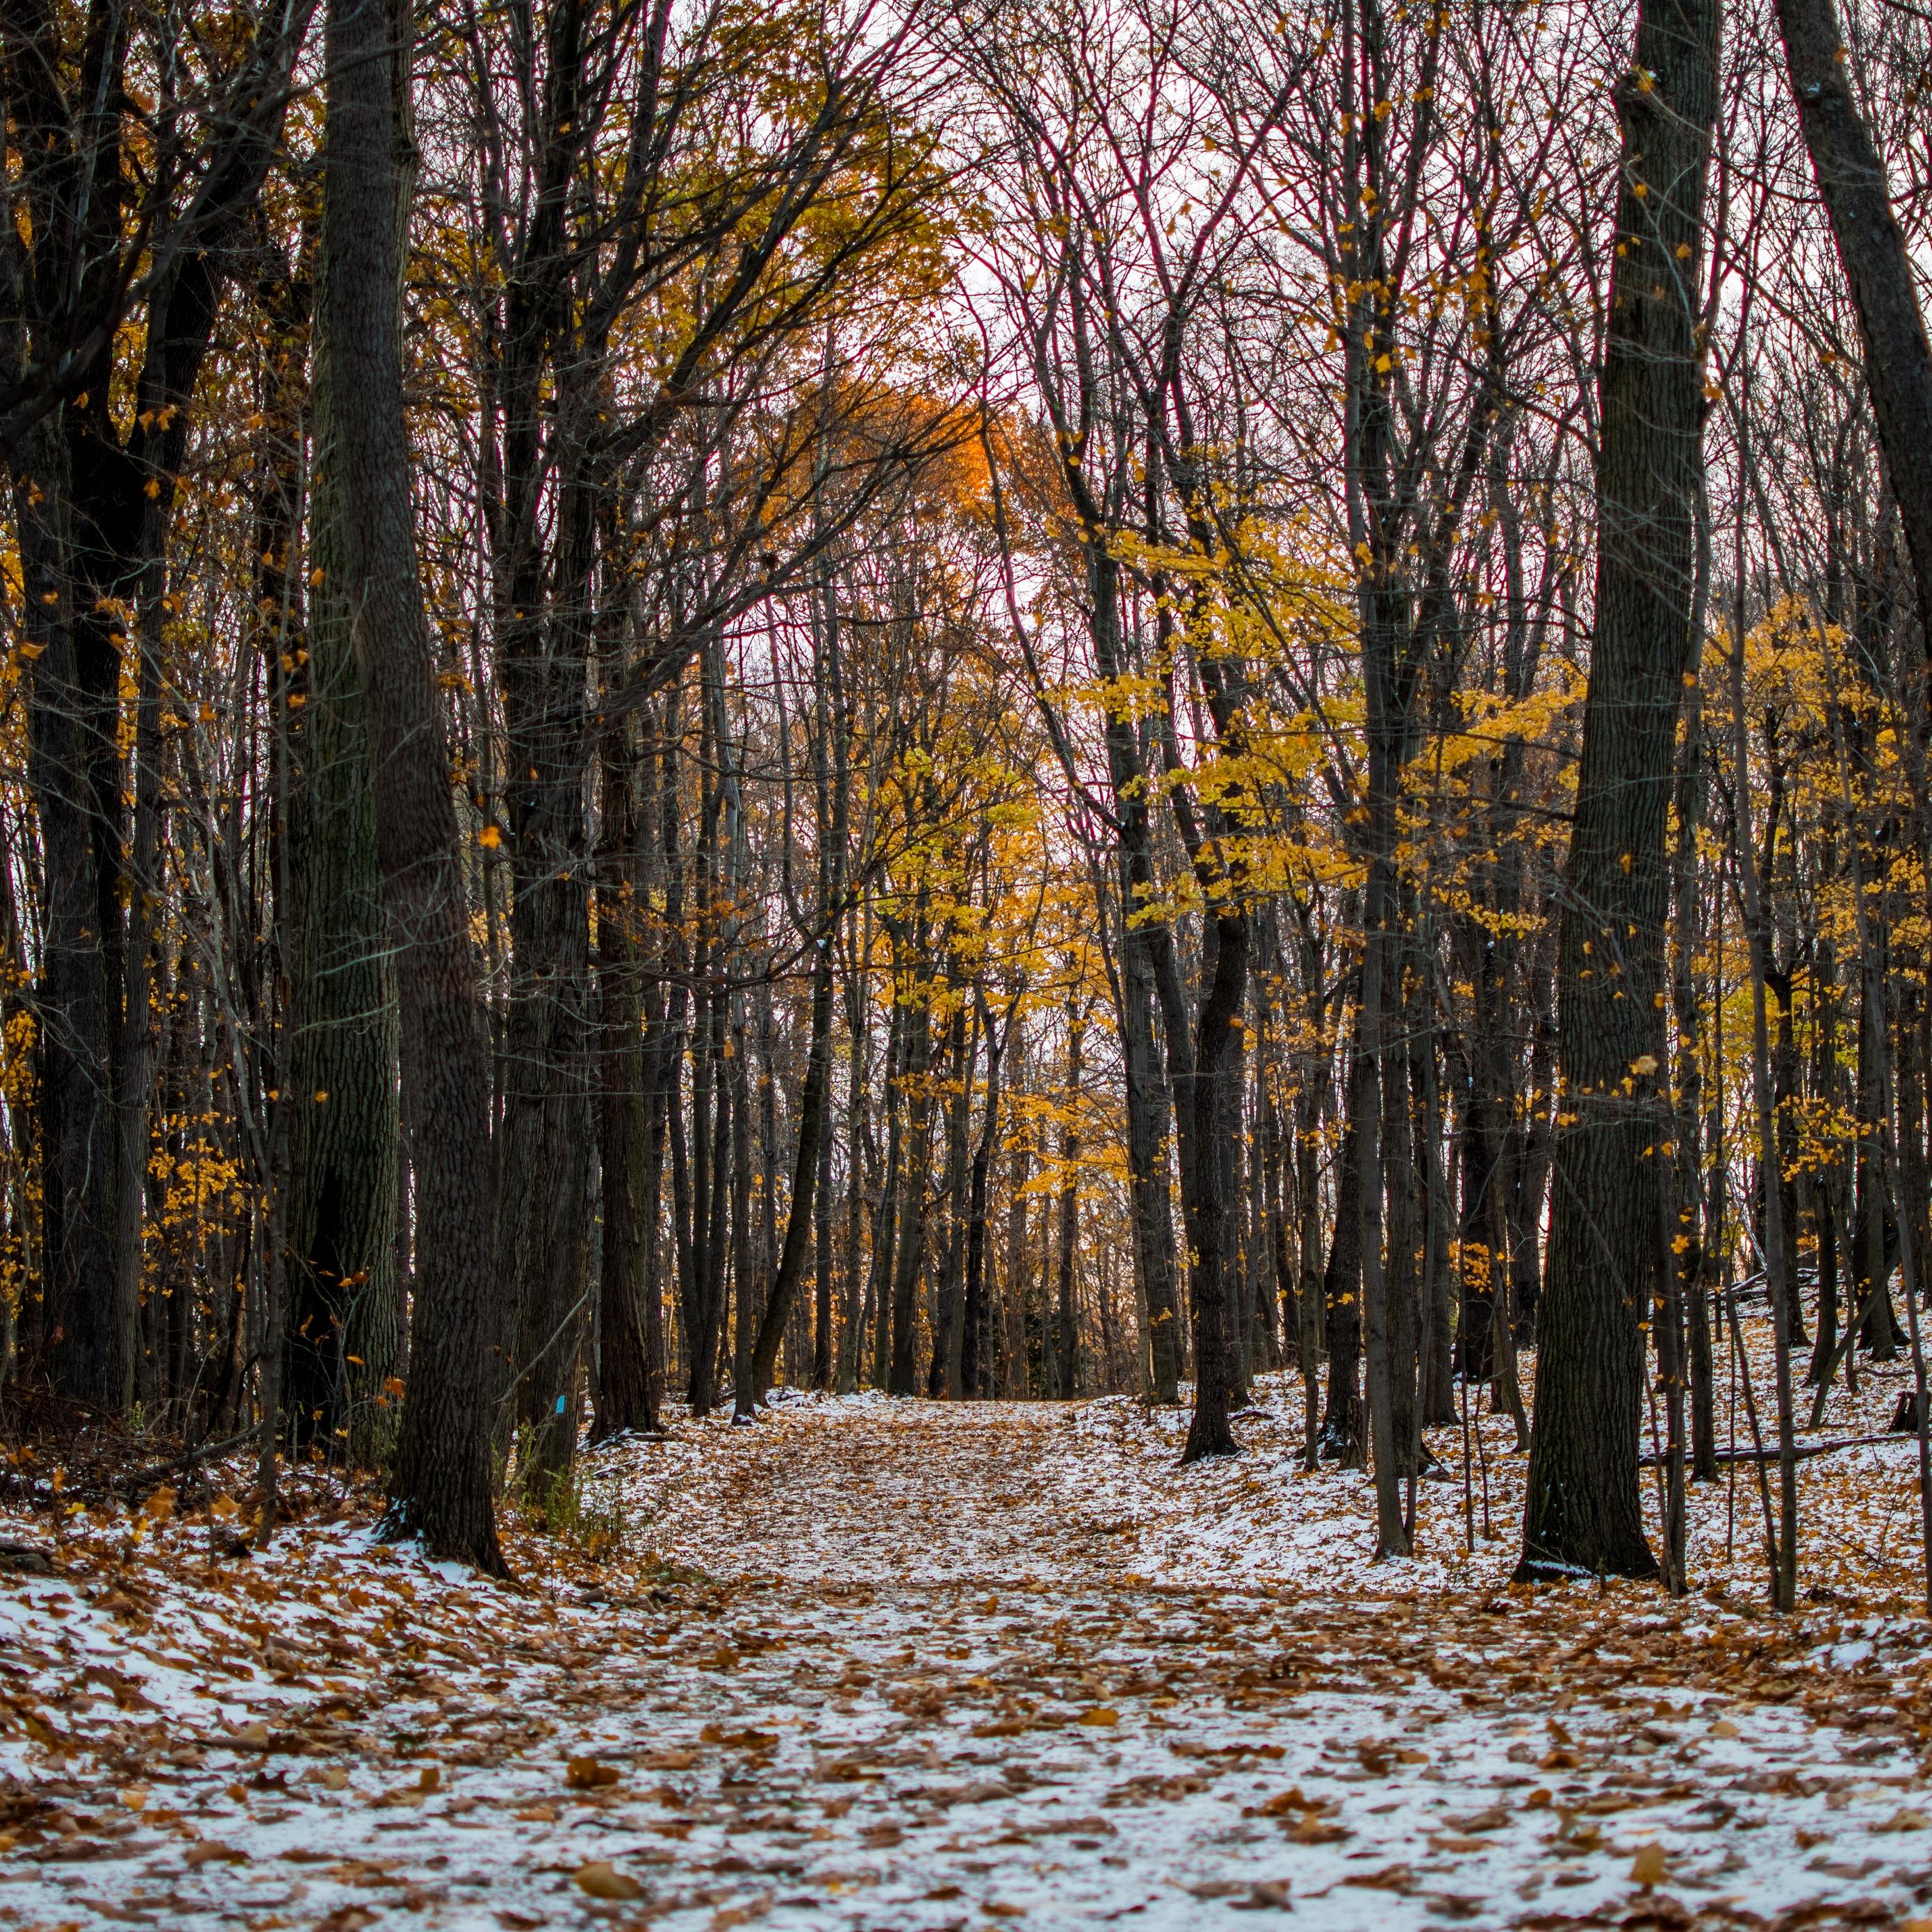 Download wallpaper 2780x2780 trail, path, forest, snow